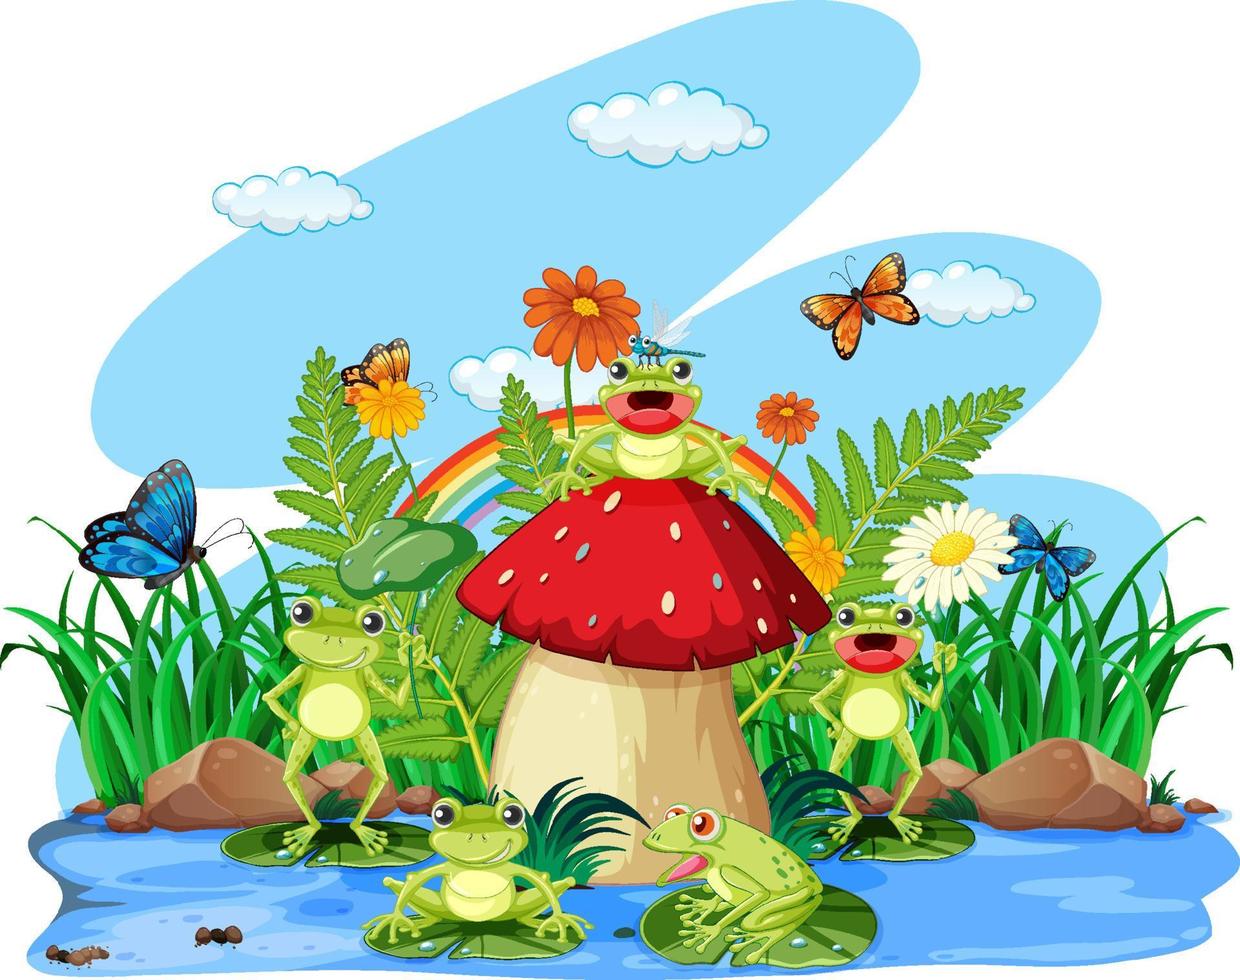 Frog living in nature vector